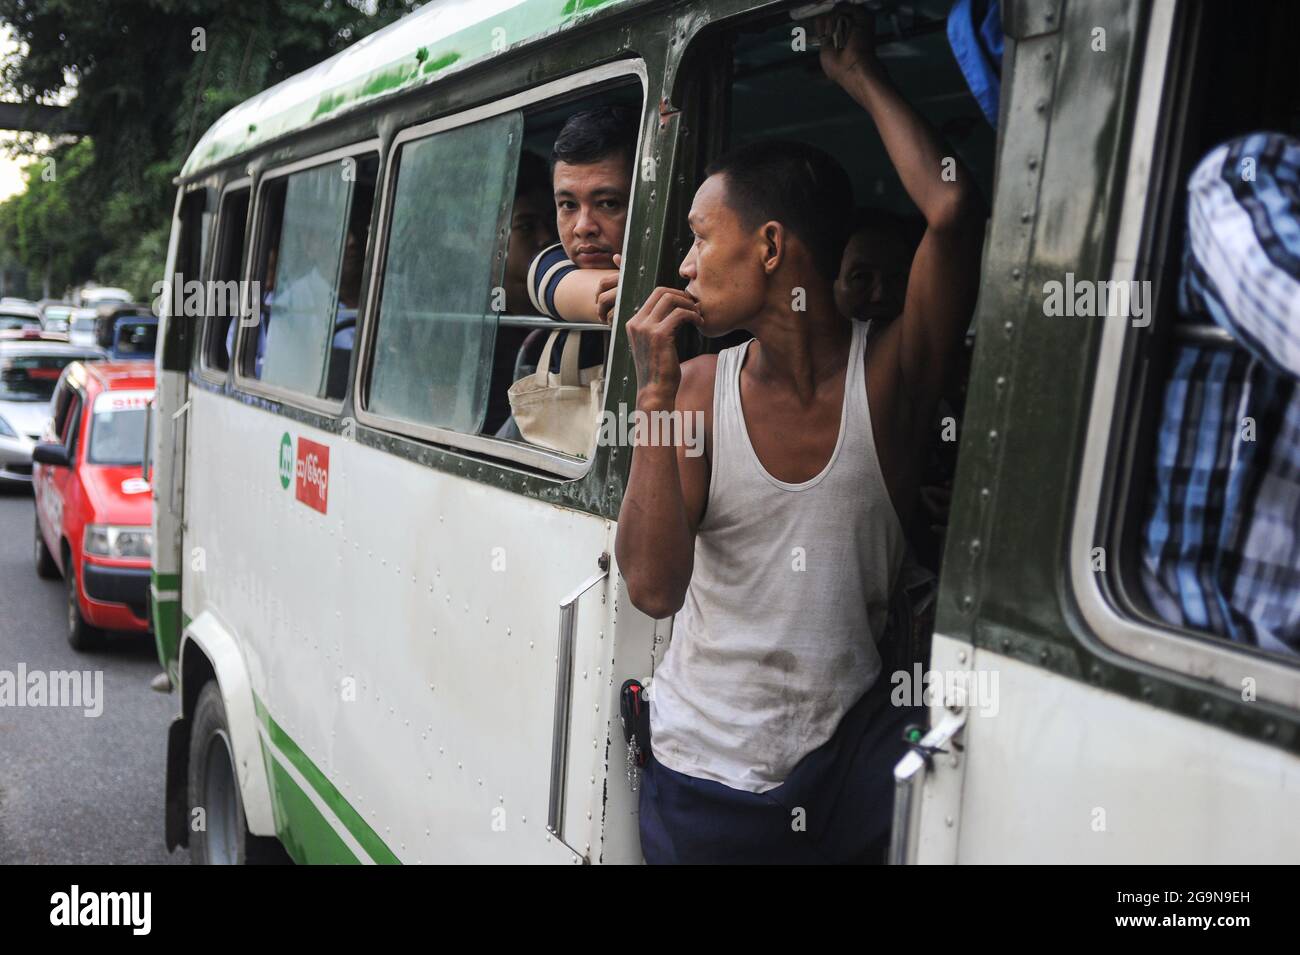 30.09.2013, Yangon, Myanmar, Asia - A bus conductor working in the local transport sector stands in the open door of a crowded bus. Stock Photo